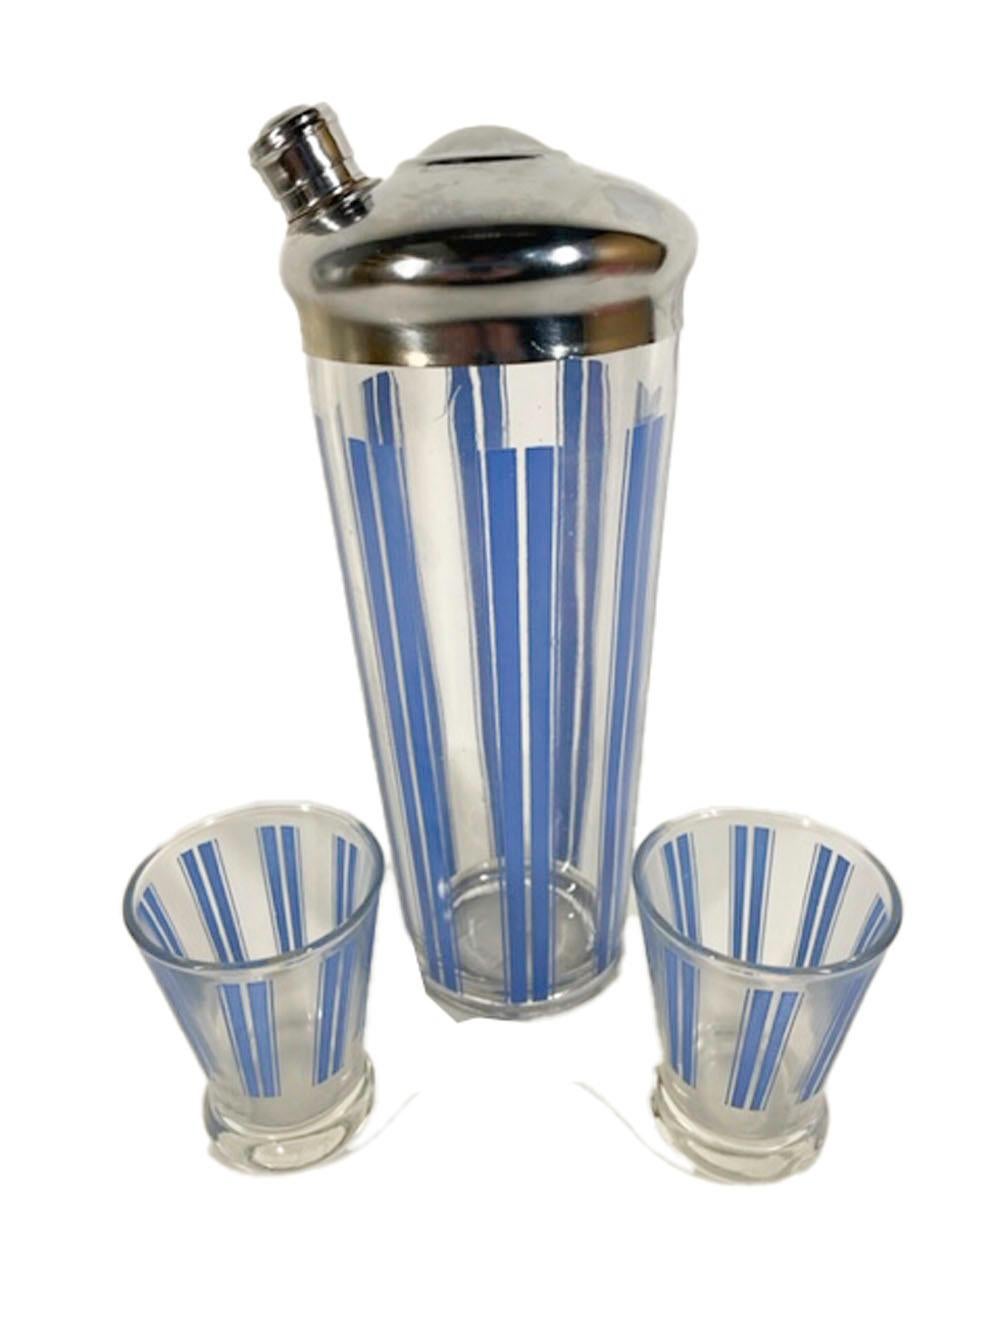 Art Deco cocktail shaker set with pairs of wide blue enamel vertical lines between pairs of narrow lines, the Shaker with a chrome lid with off center side pour spout. The set consists of a Shaker and pair of weighted cocktail/martini glasses.